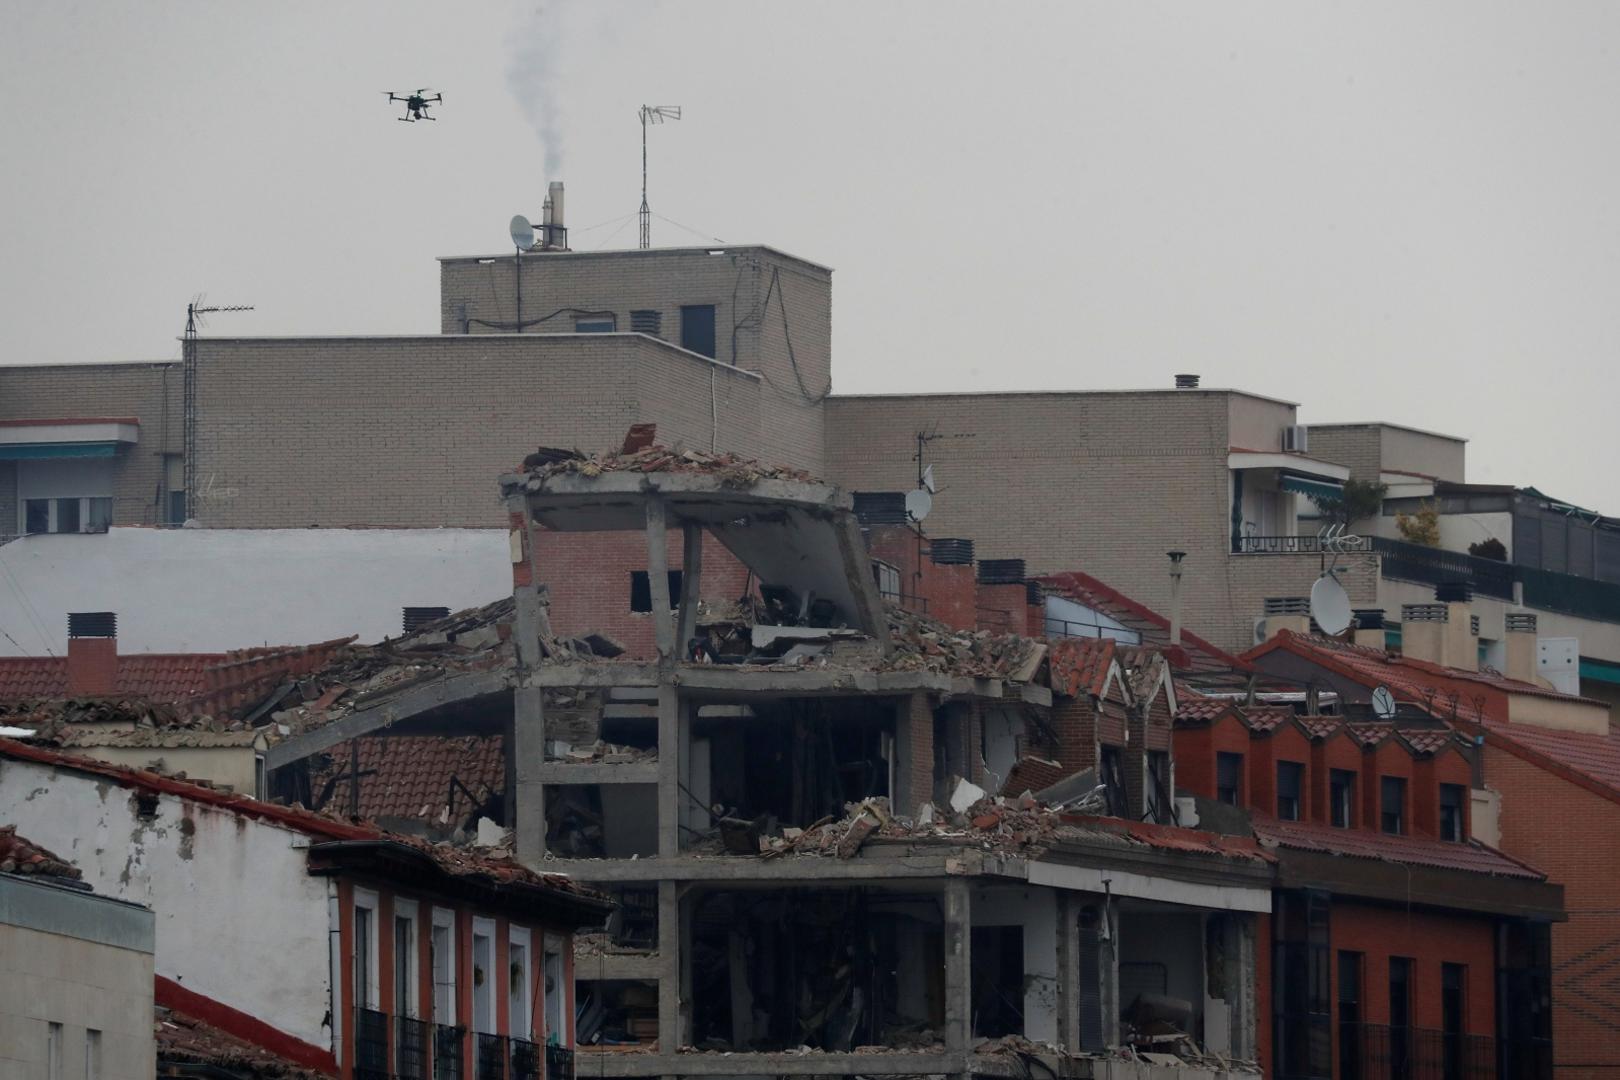 Explosion in Madrid downtown A drone flies over the building belonging to the Catholic Church affected by a deadly explosion, in Madrid downtown, Spain, January 20, 2021. REUTERS/Susana Vera SUSANA VERA